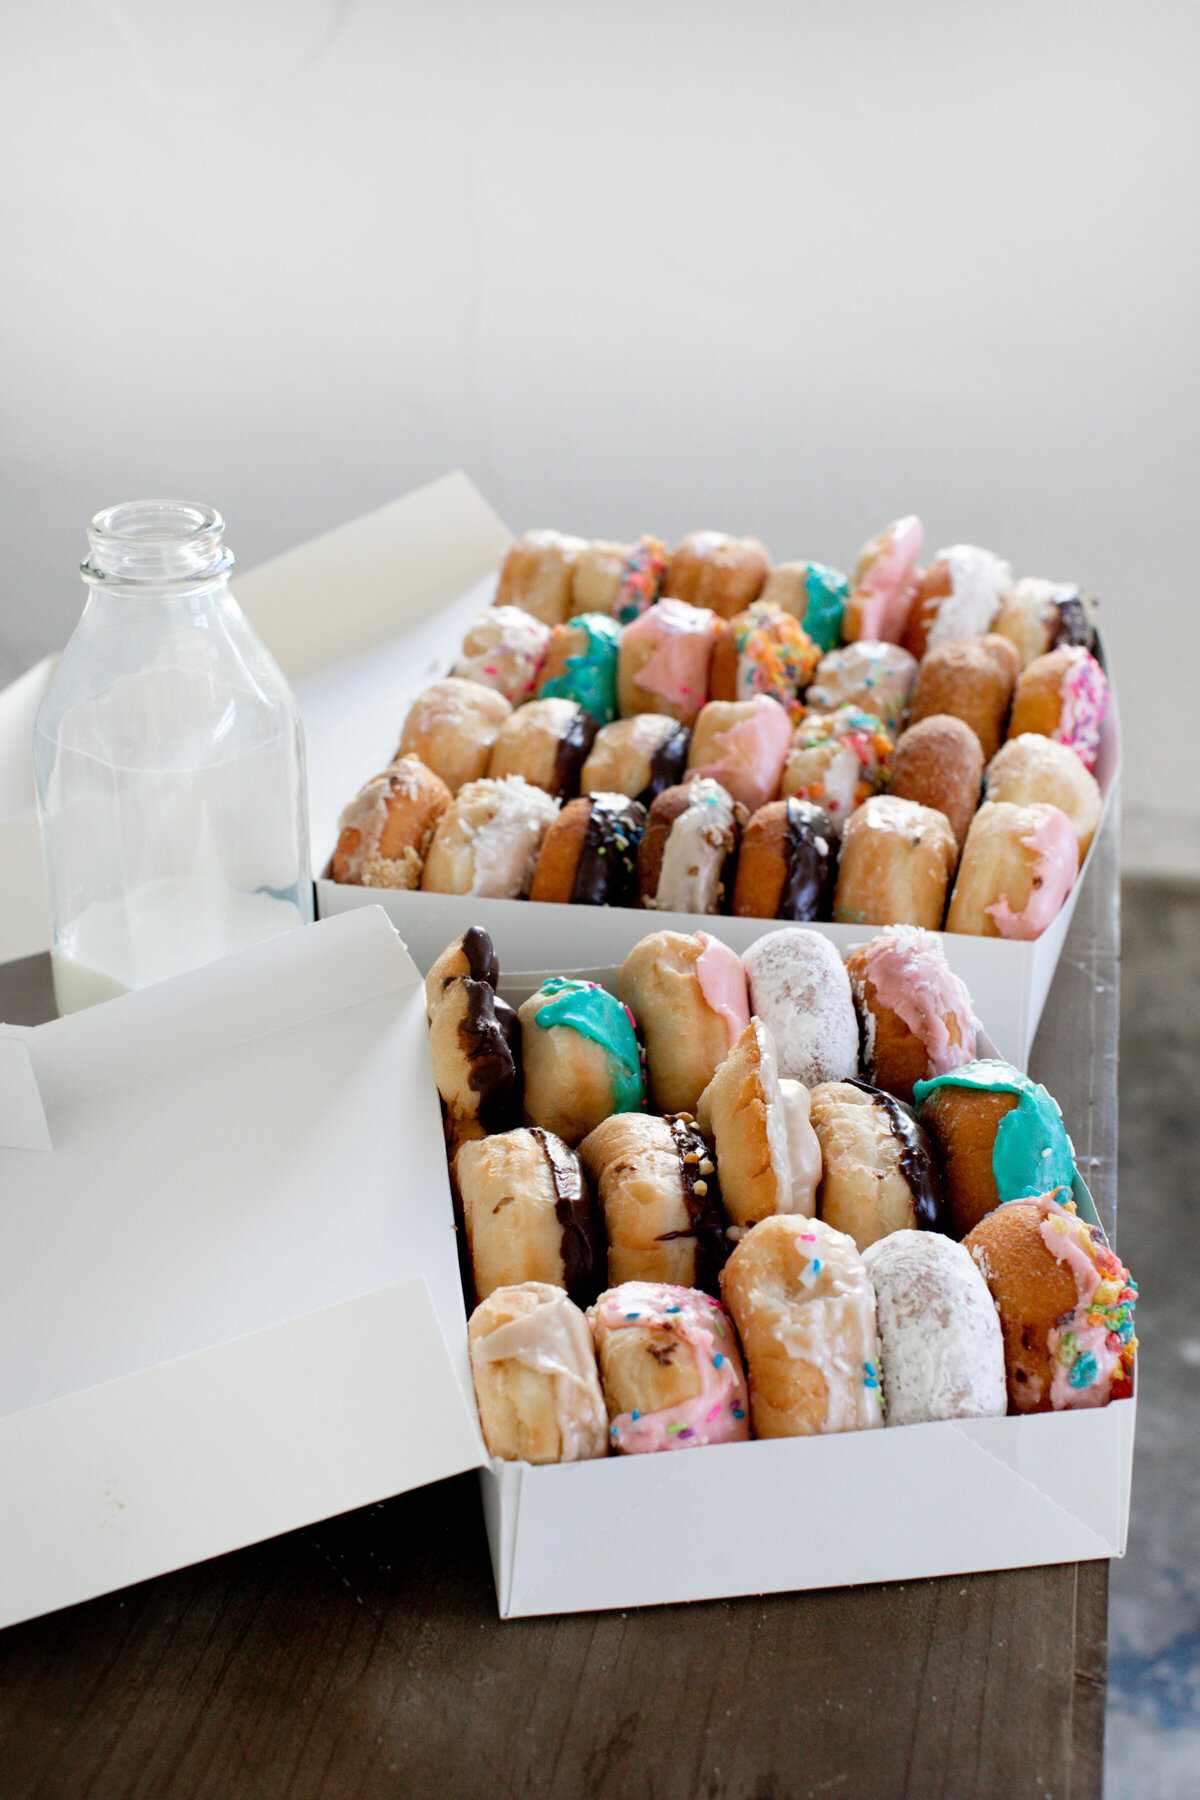 Milk Jug and Stacked Donuts in a Box  on a Table - Daylight Donuts